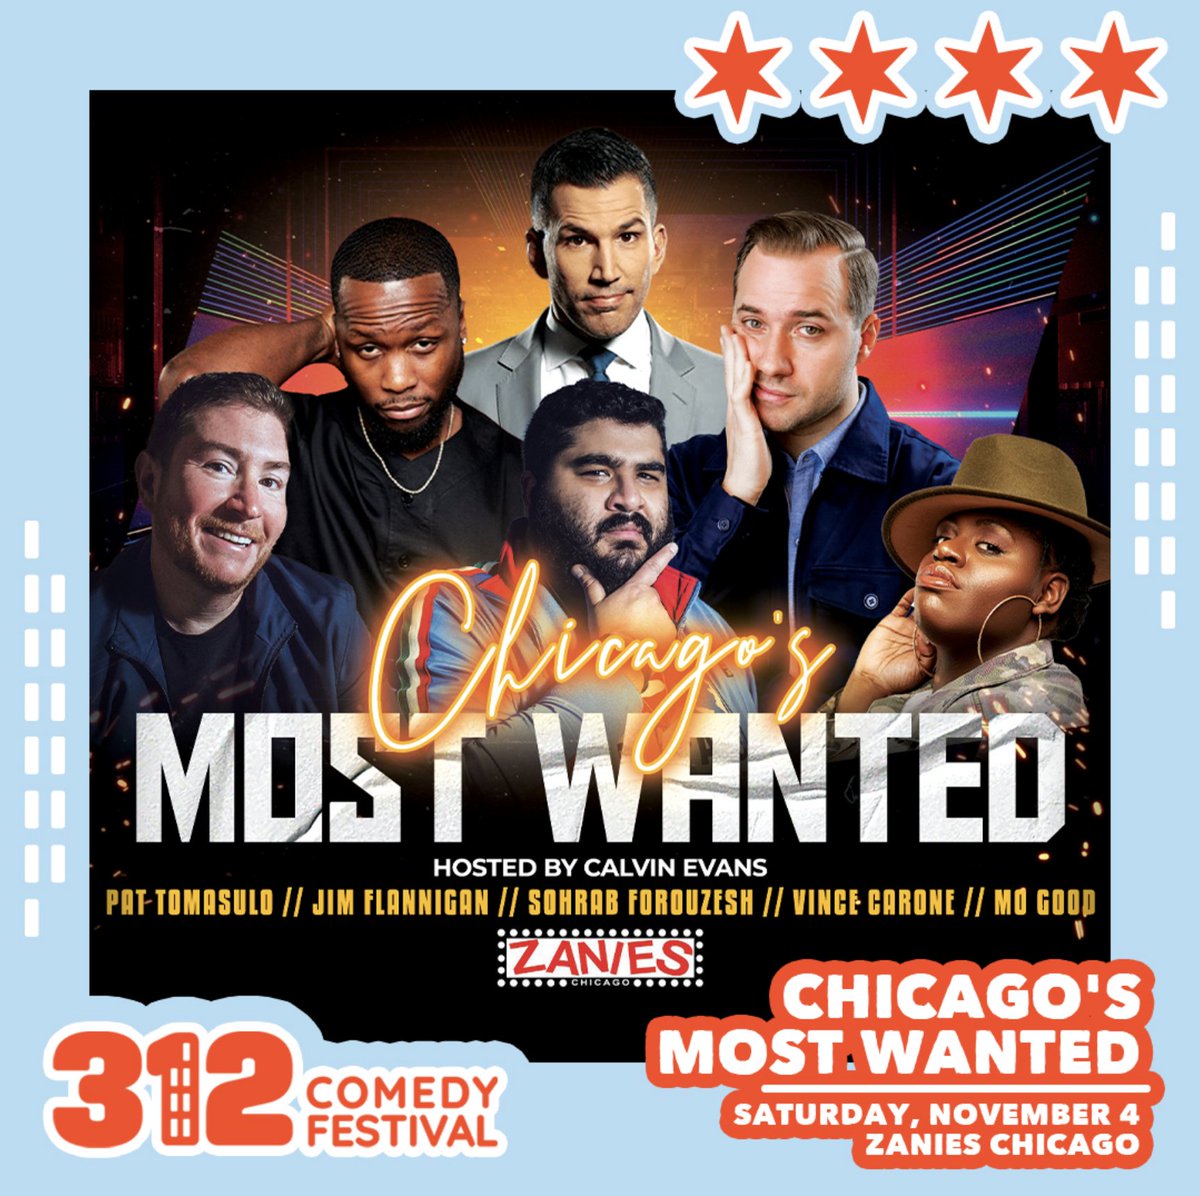 🎙️ 312 COMEDY FESTIVAL SHOW Join us November 4 for Chicago's Most Wanted! Chicago's hottest headliners will share the Zanies stage for one night only as part of the @312ComedyFest. Grab tickets while you can, Chicago--> bit.ly/312Fest_CMW110…